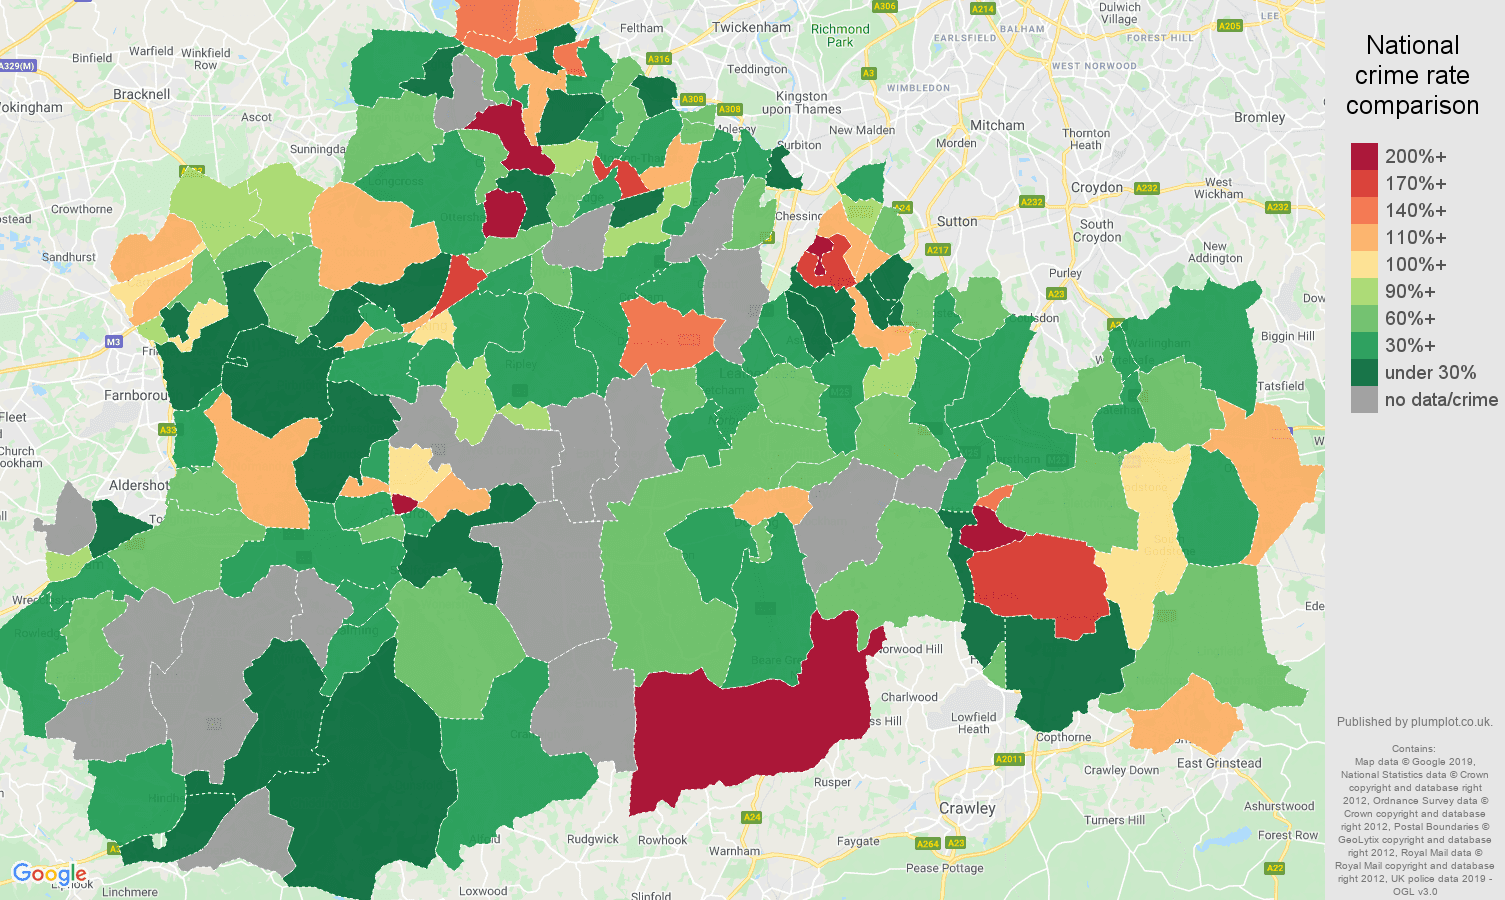 Surrey possession of weapons crime rate comparison map